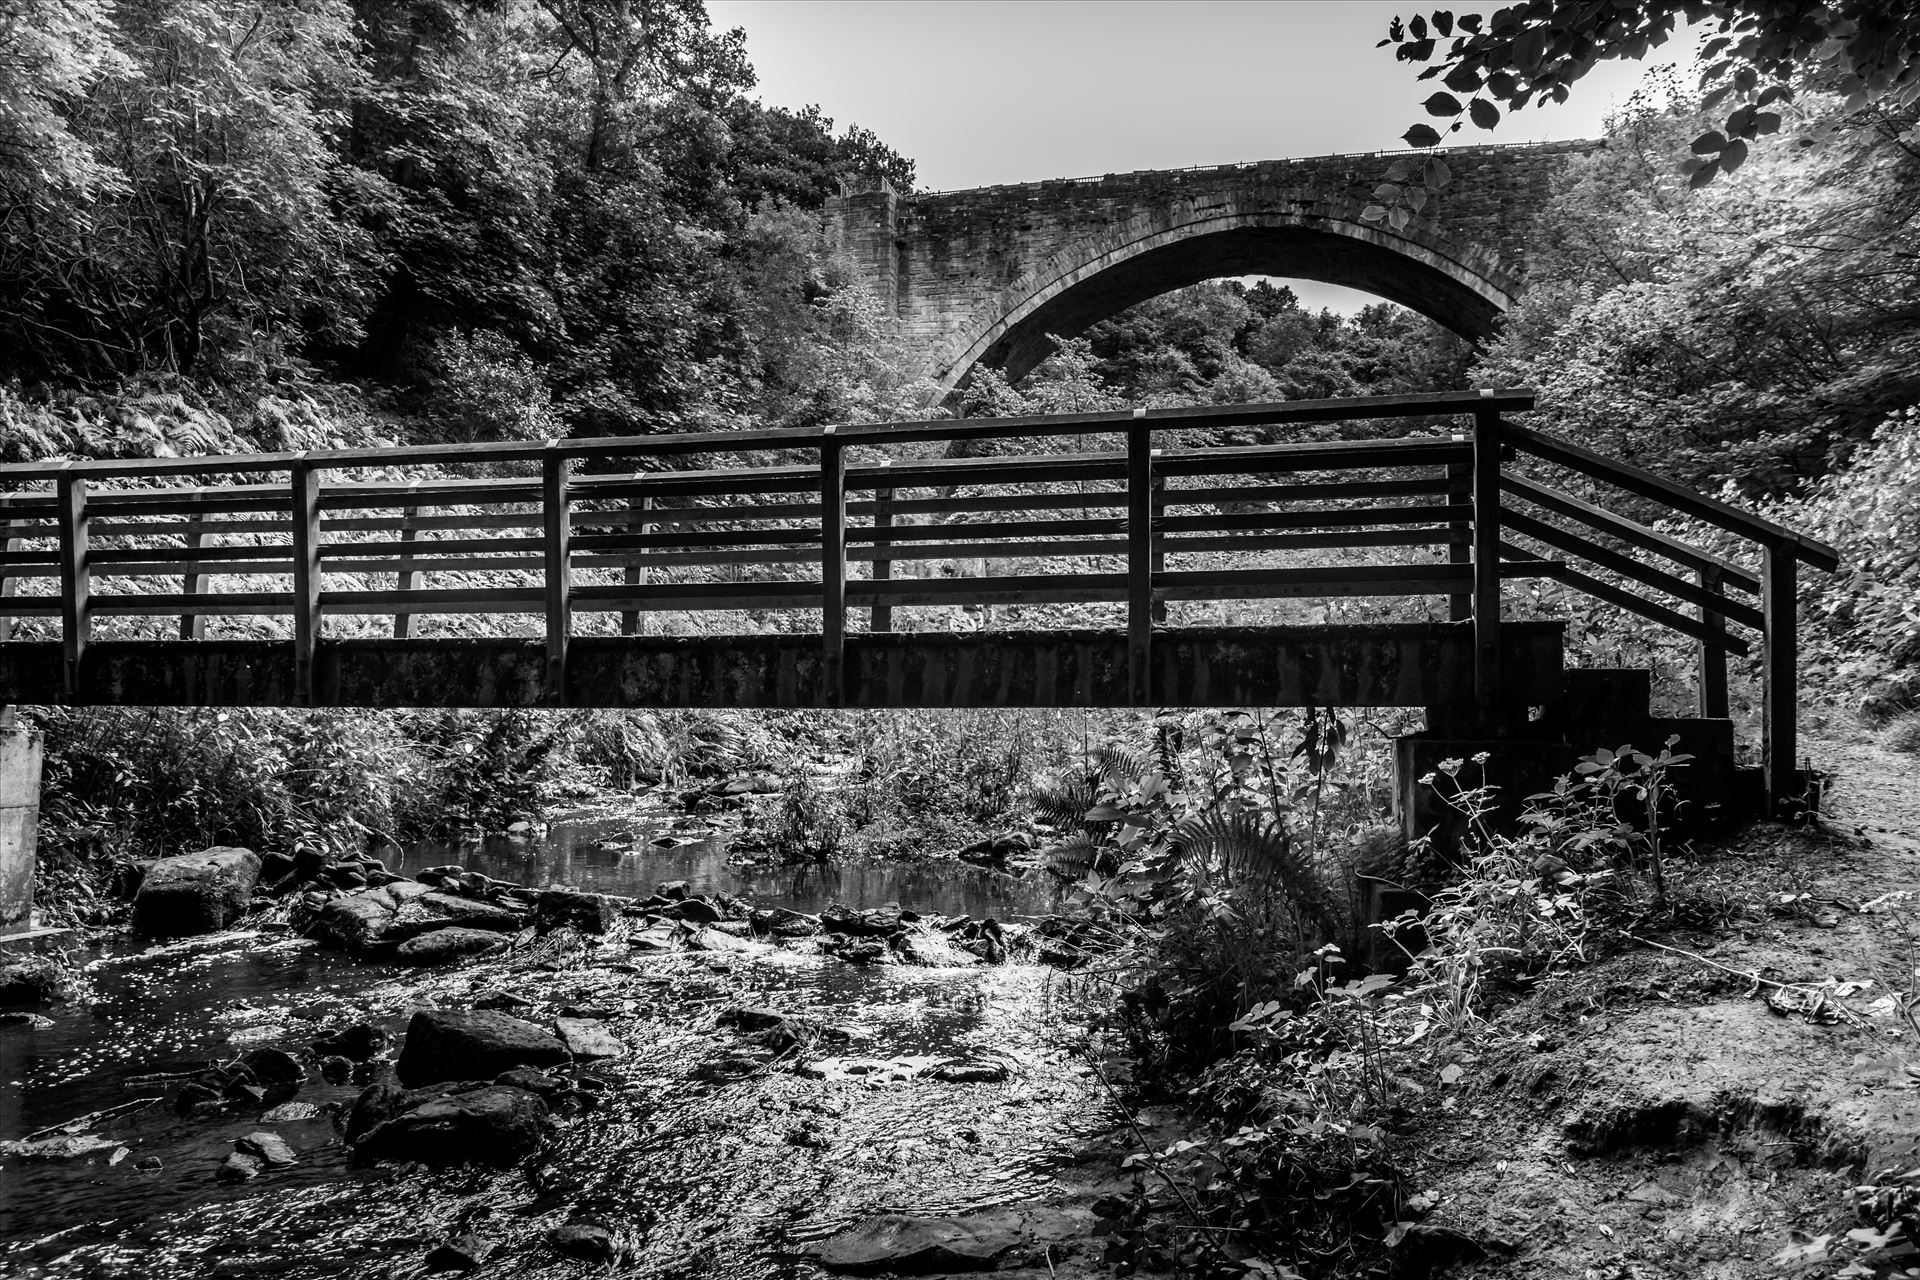 Causey Arch - The Causey Arch is a bridge near Stanley in County Durham. It is the oldest surviving single-arch railway bridge in the world. When the bridge was completed in 1726, it was the longest single-span bridge in the country. by philreay